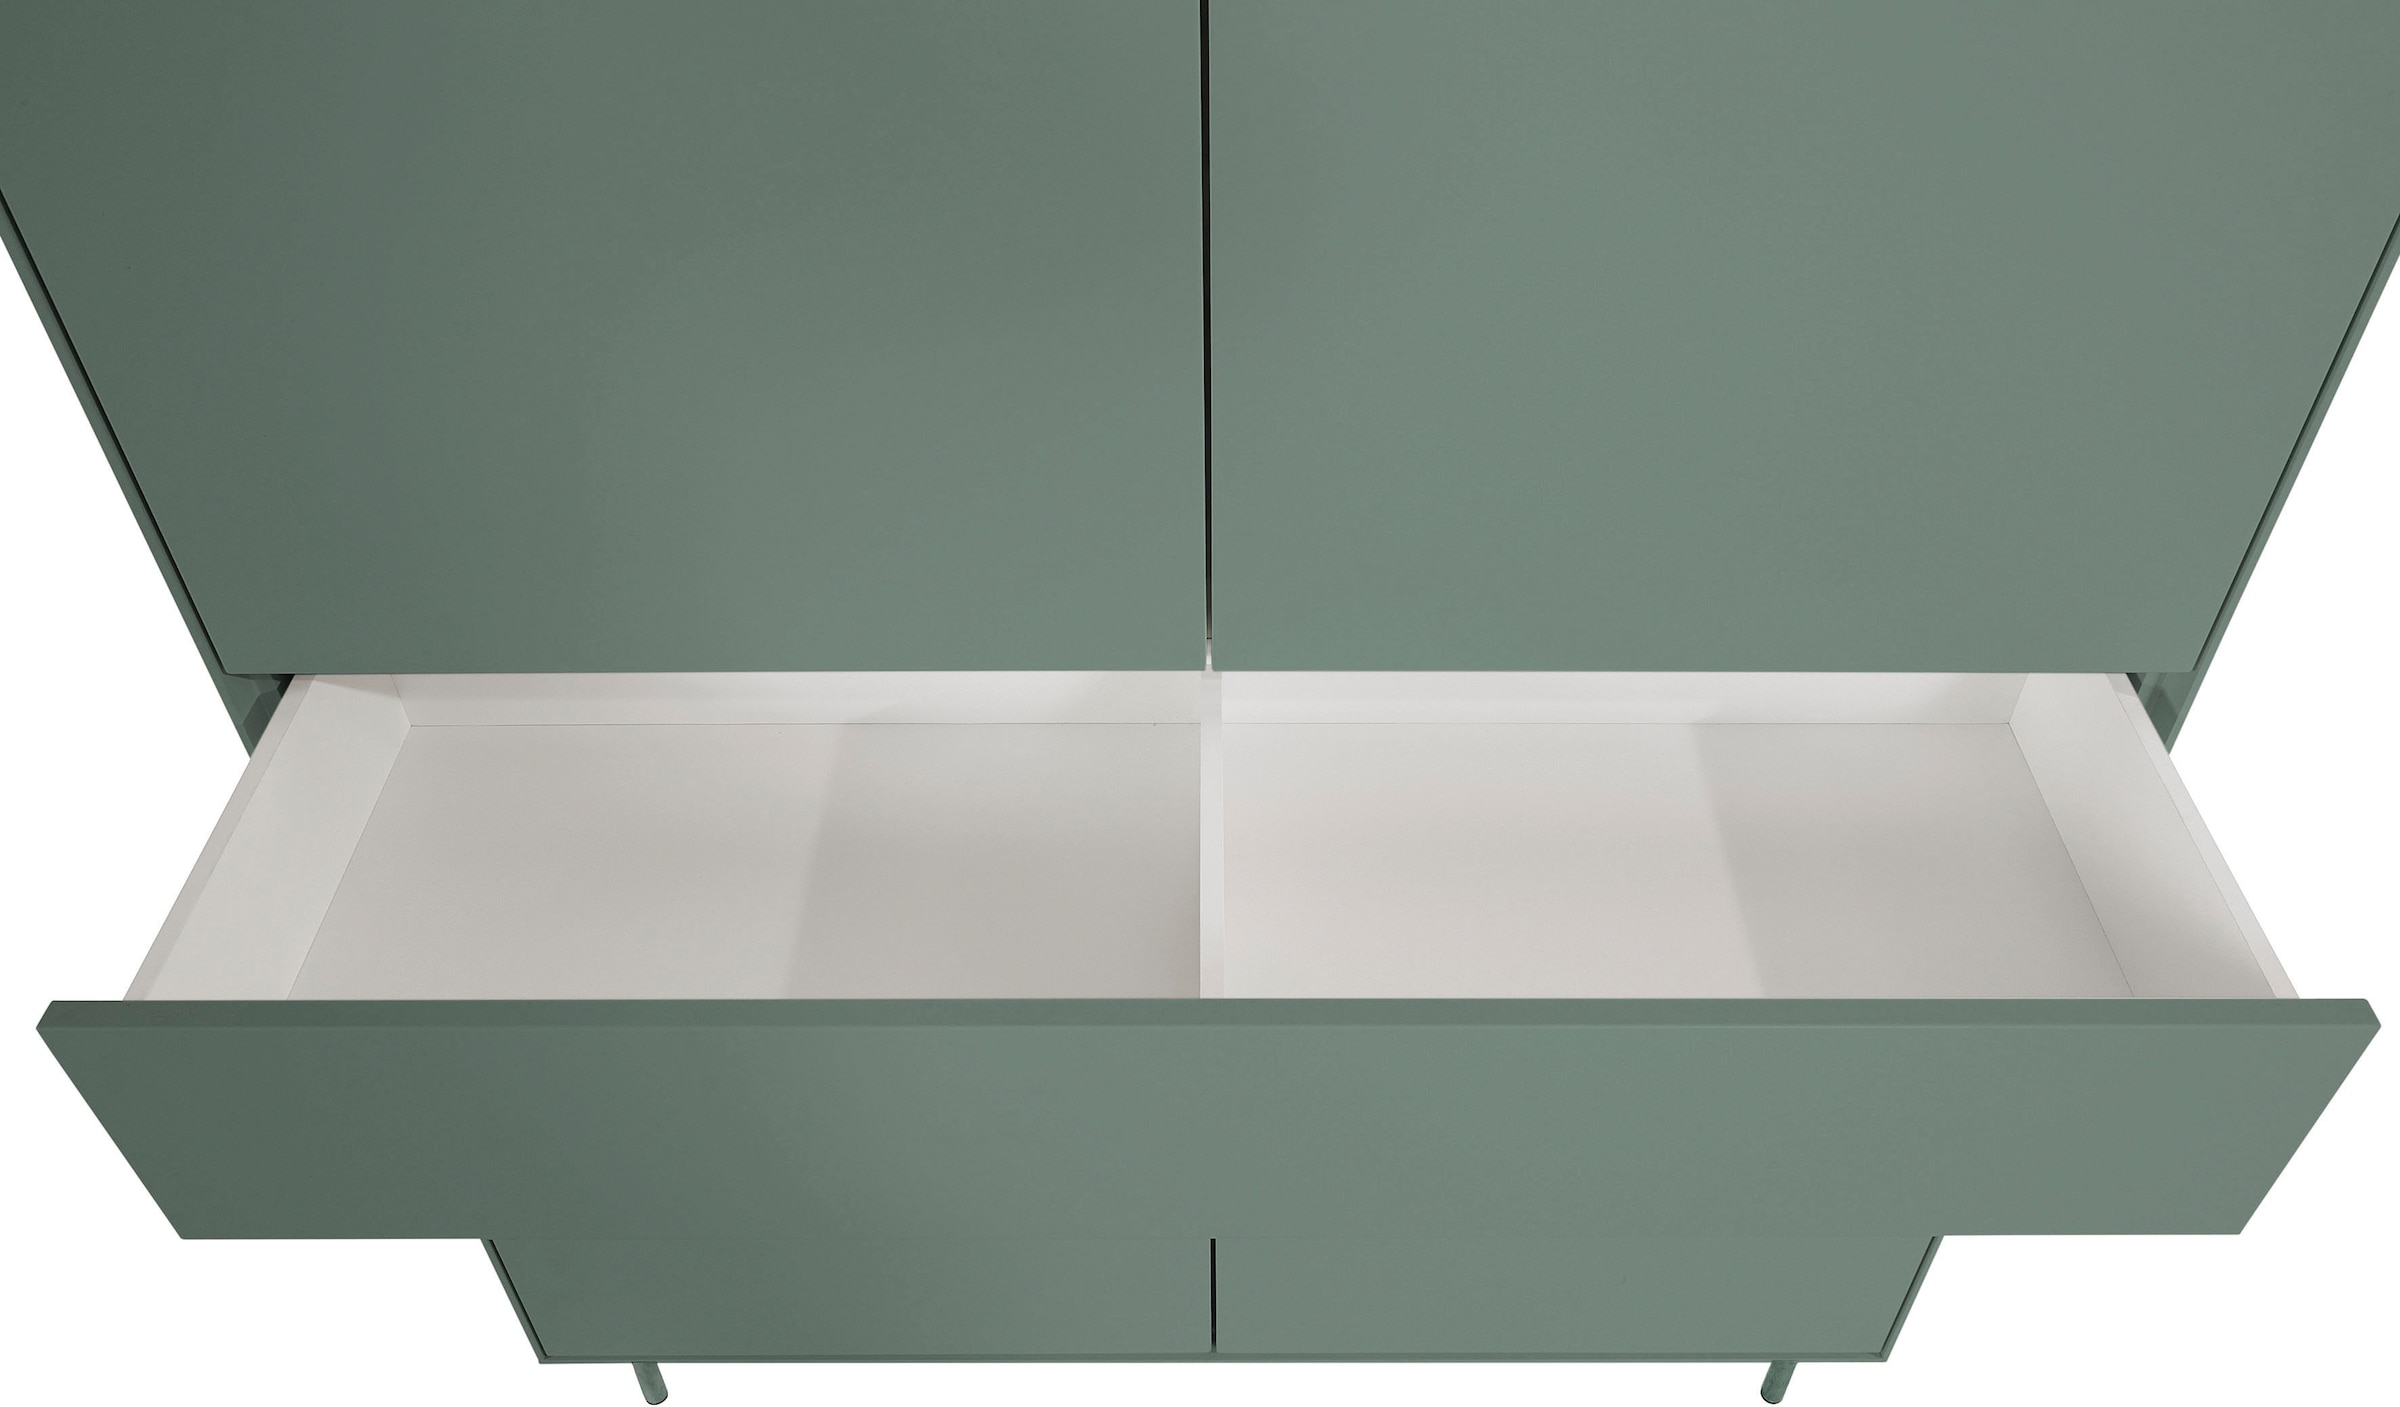 LeGer Home by Lena Gercke Highboard »Essentials«, Höhe: 144cm, MDF lackiert, Push-to-open-Funktion